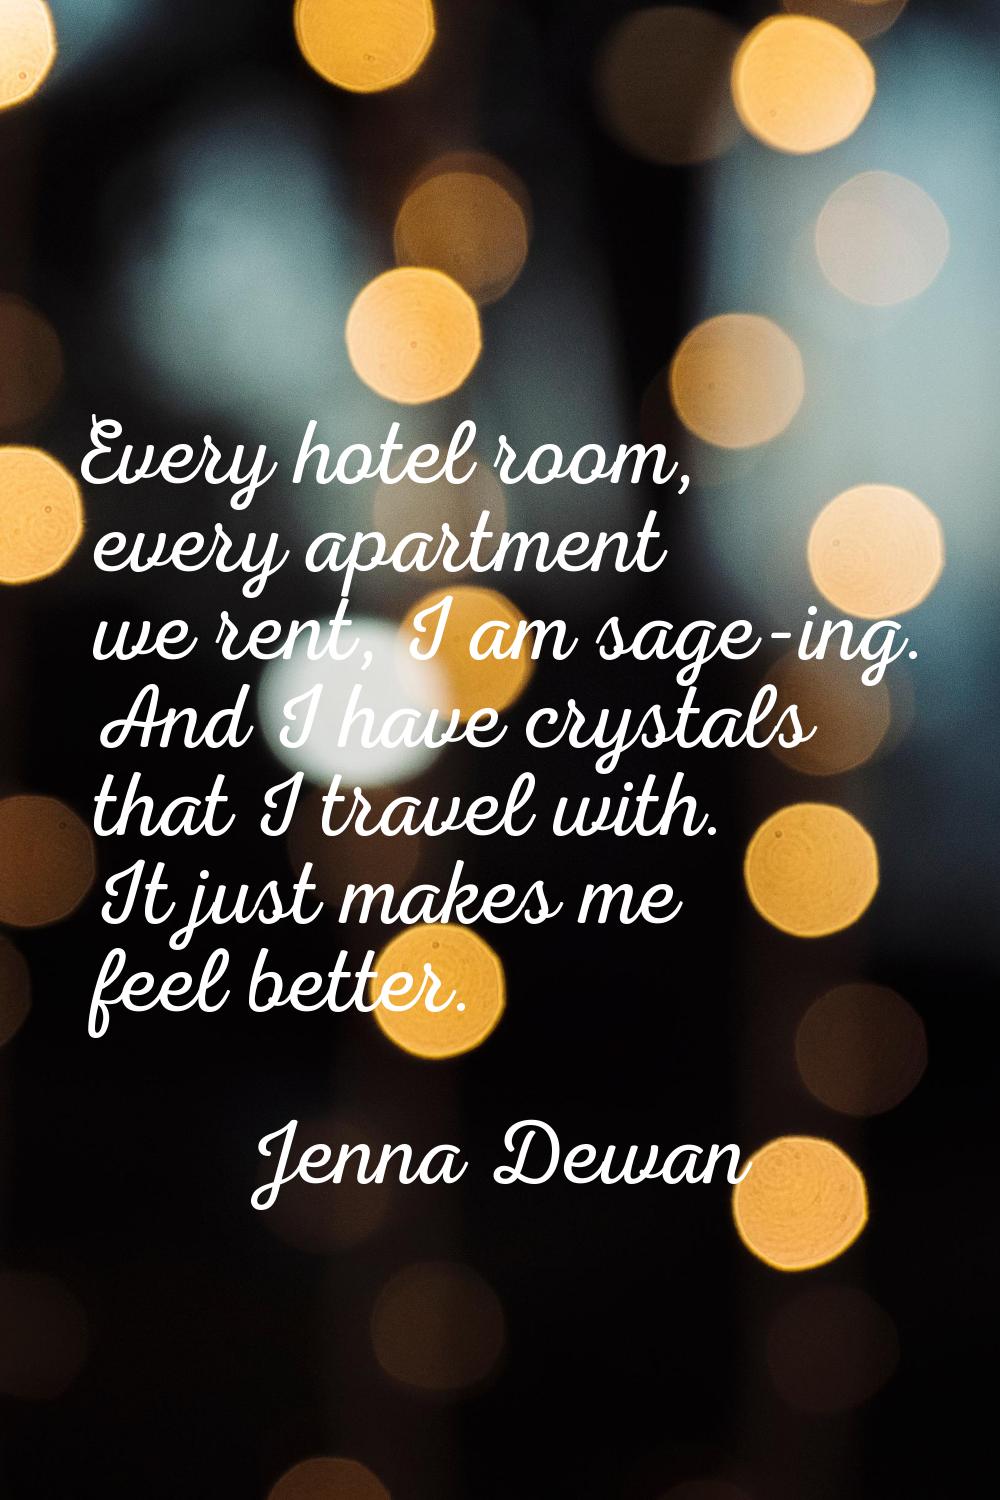 Every hotel room, every apartment we rent, I am sage-ing. And I have crystals that I travel with. I